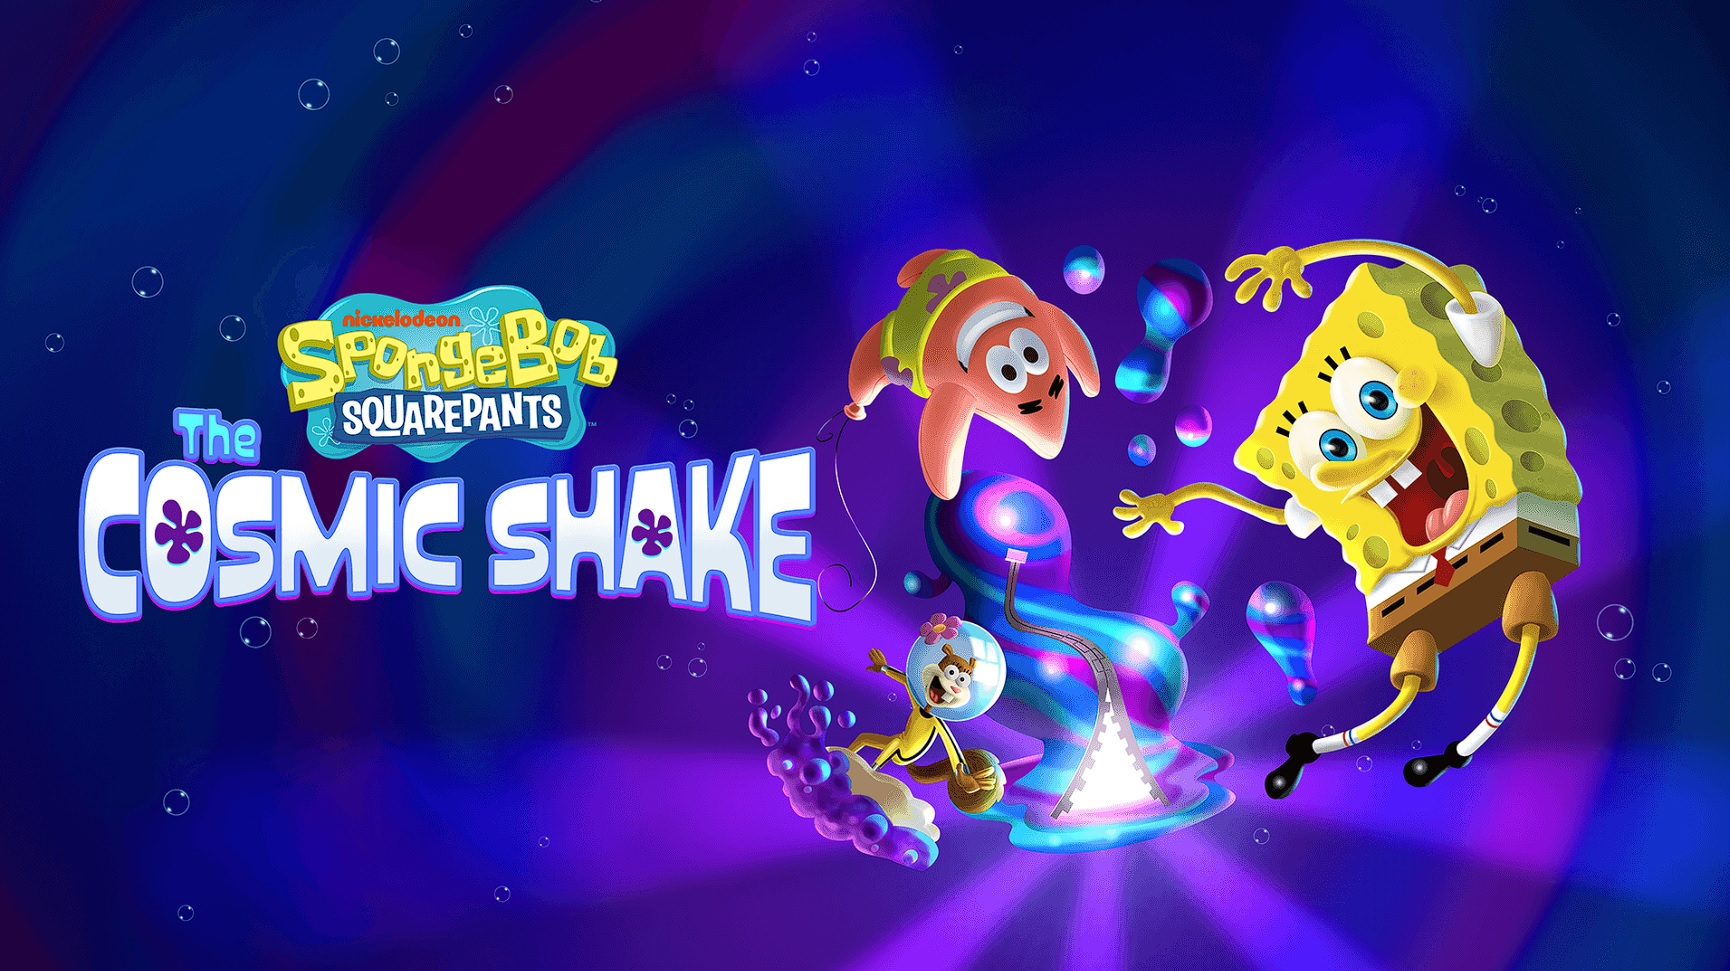 Explore Wishworlds in SongeBob SquarePants: The Cosmic Shake, out now